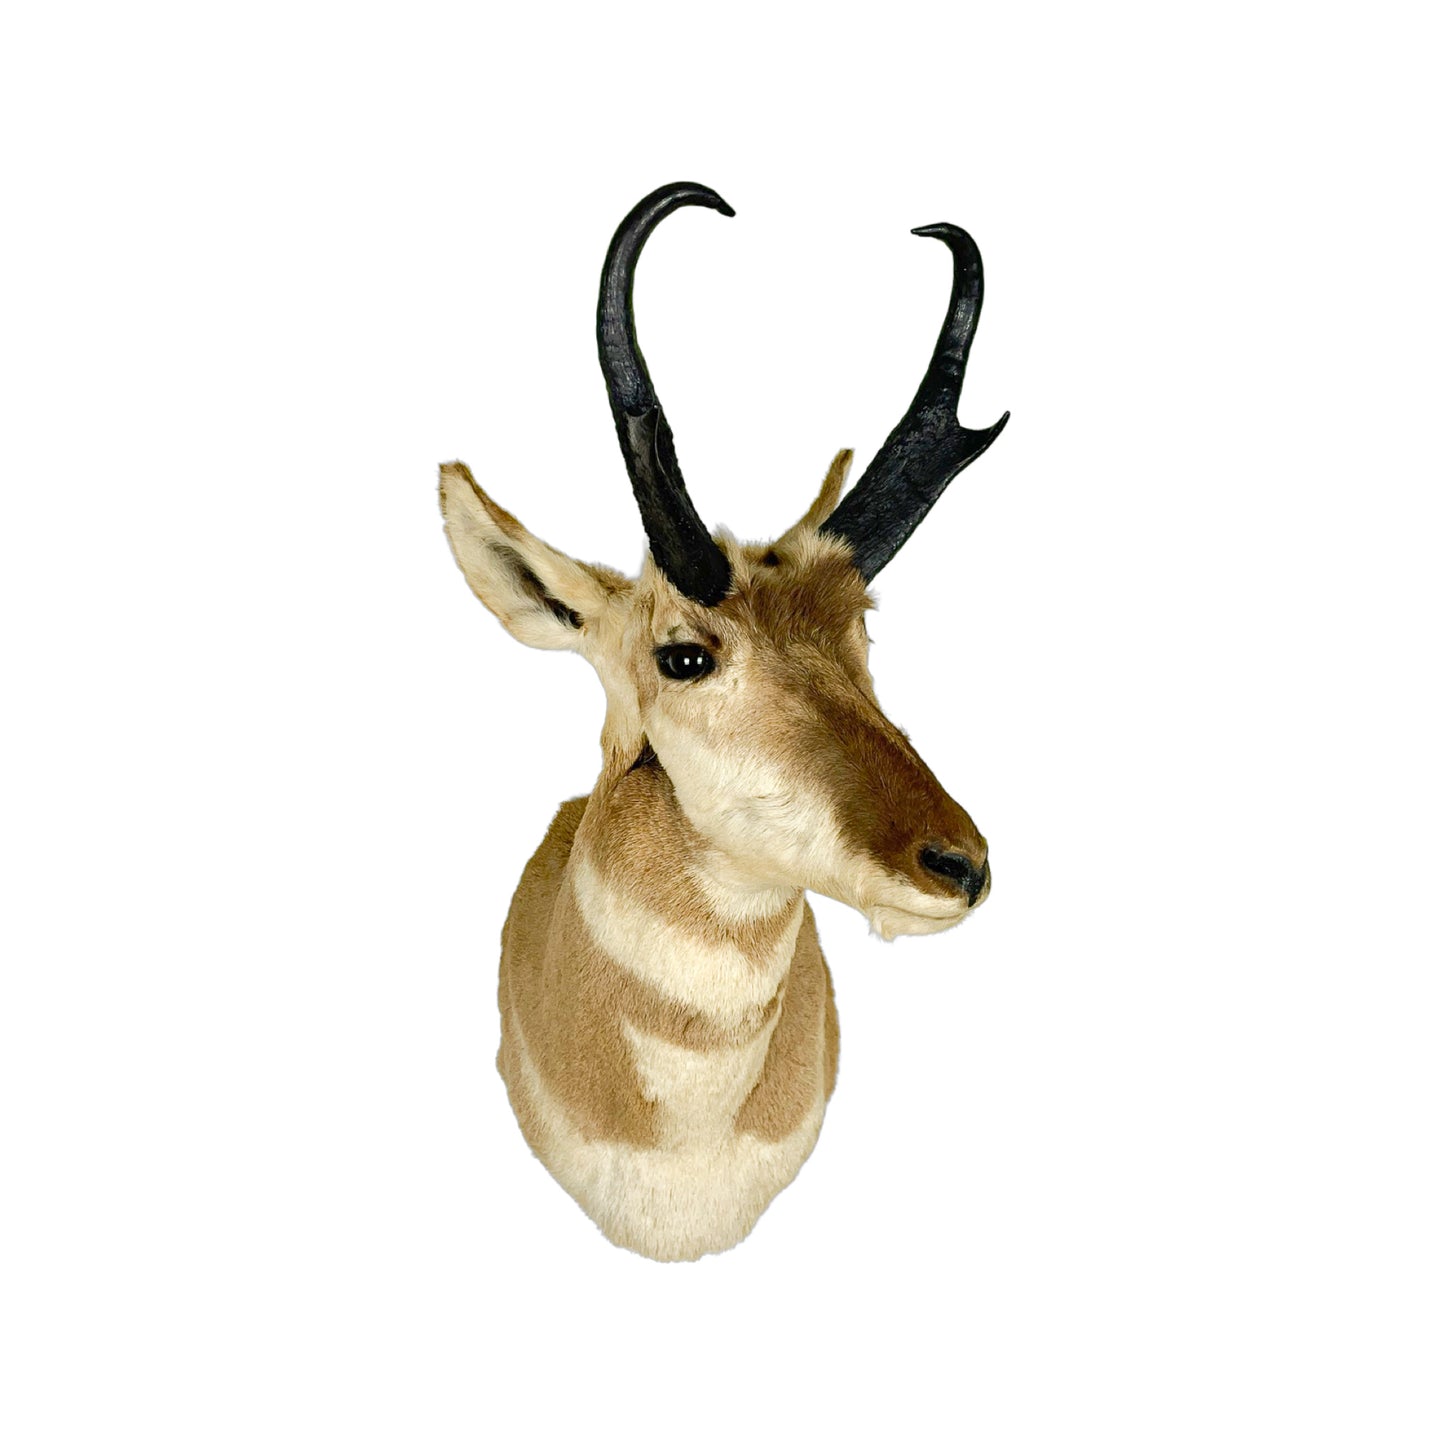 A Home Decor Taxidermy Pronghorn Shoulder Mount of Grade Respectable